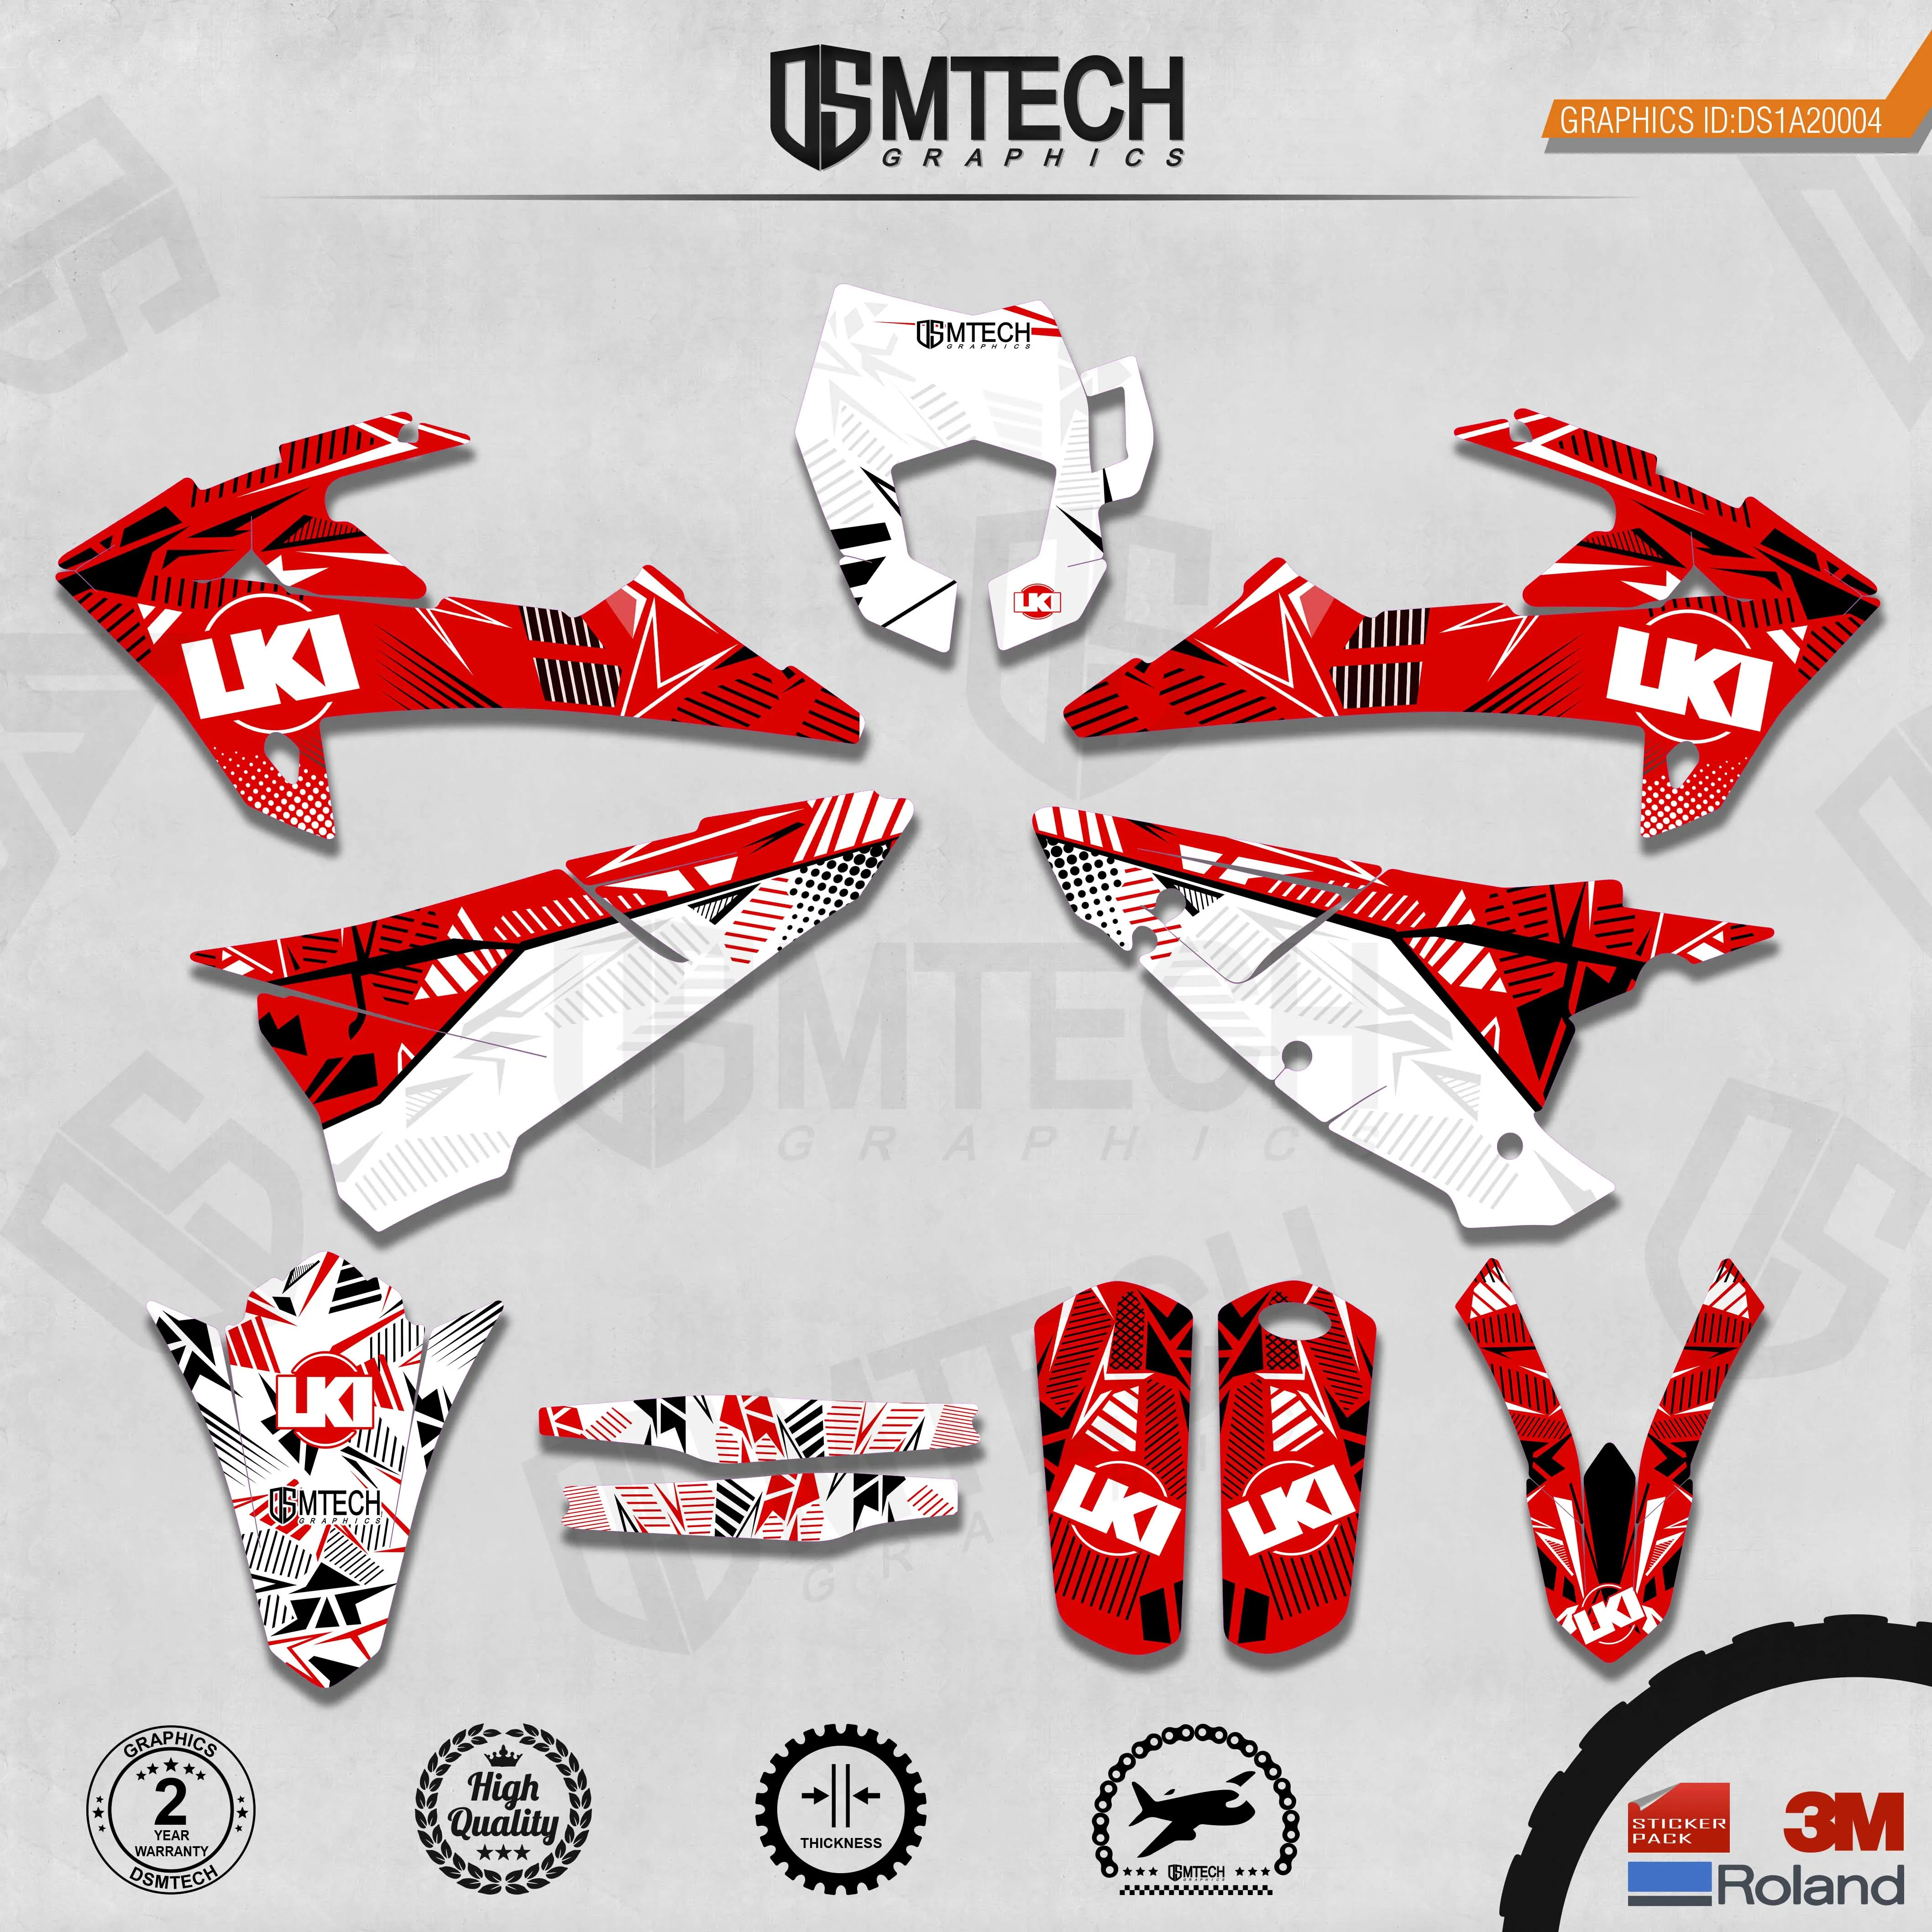 DSMTECH Customized Team Graphics Backgrounds Decals 3M Custom Stickers For GASGAS 2018 2019 2020  EC 004